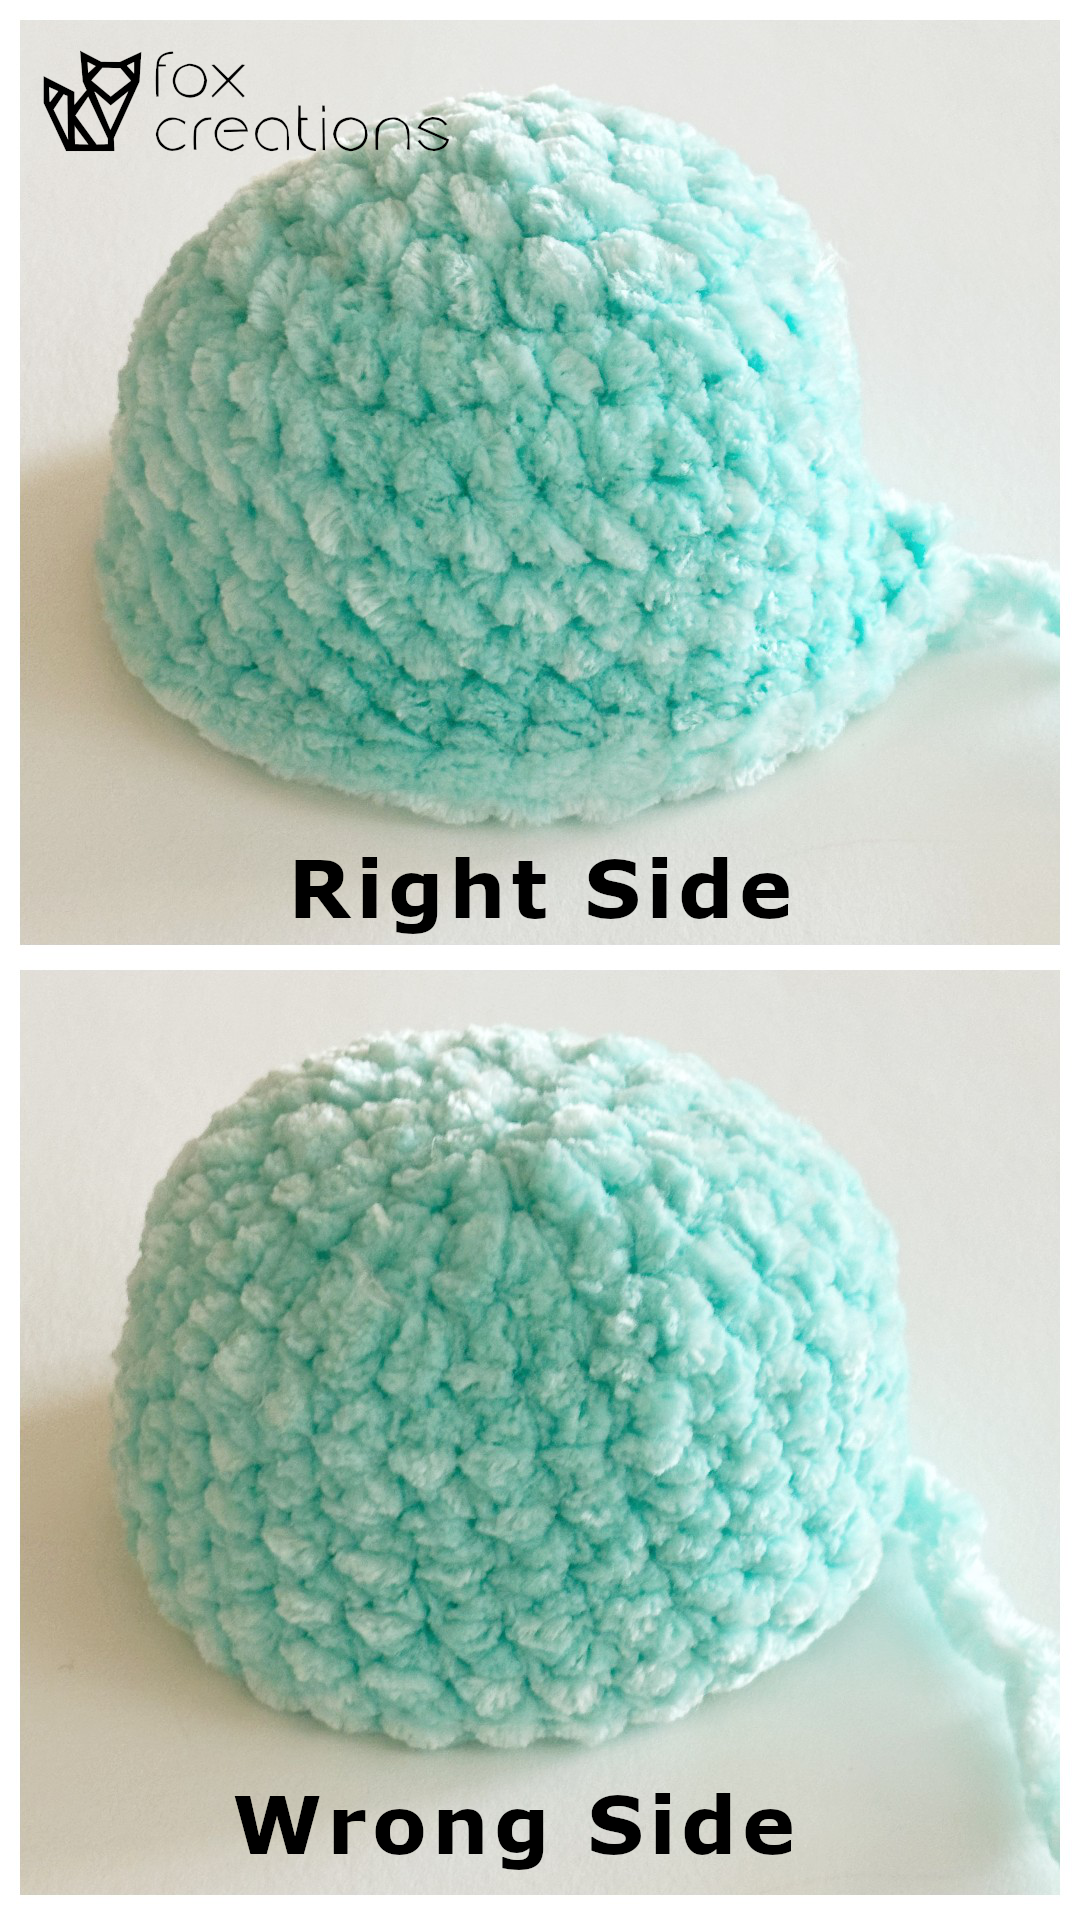 What is the right side of crochet amigurumi second example